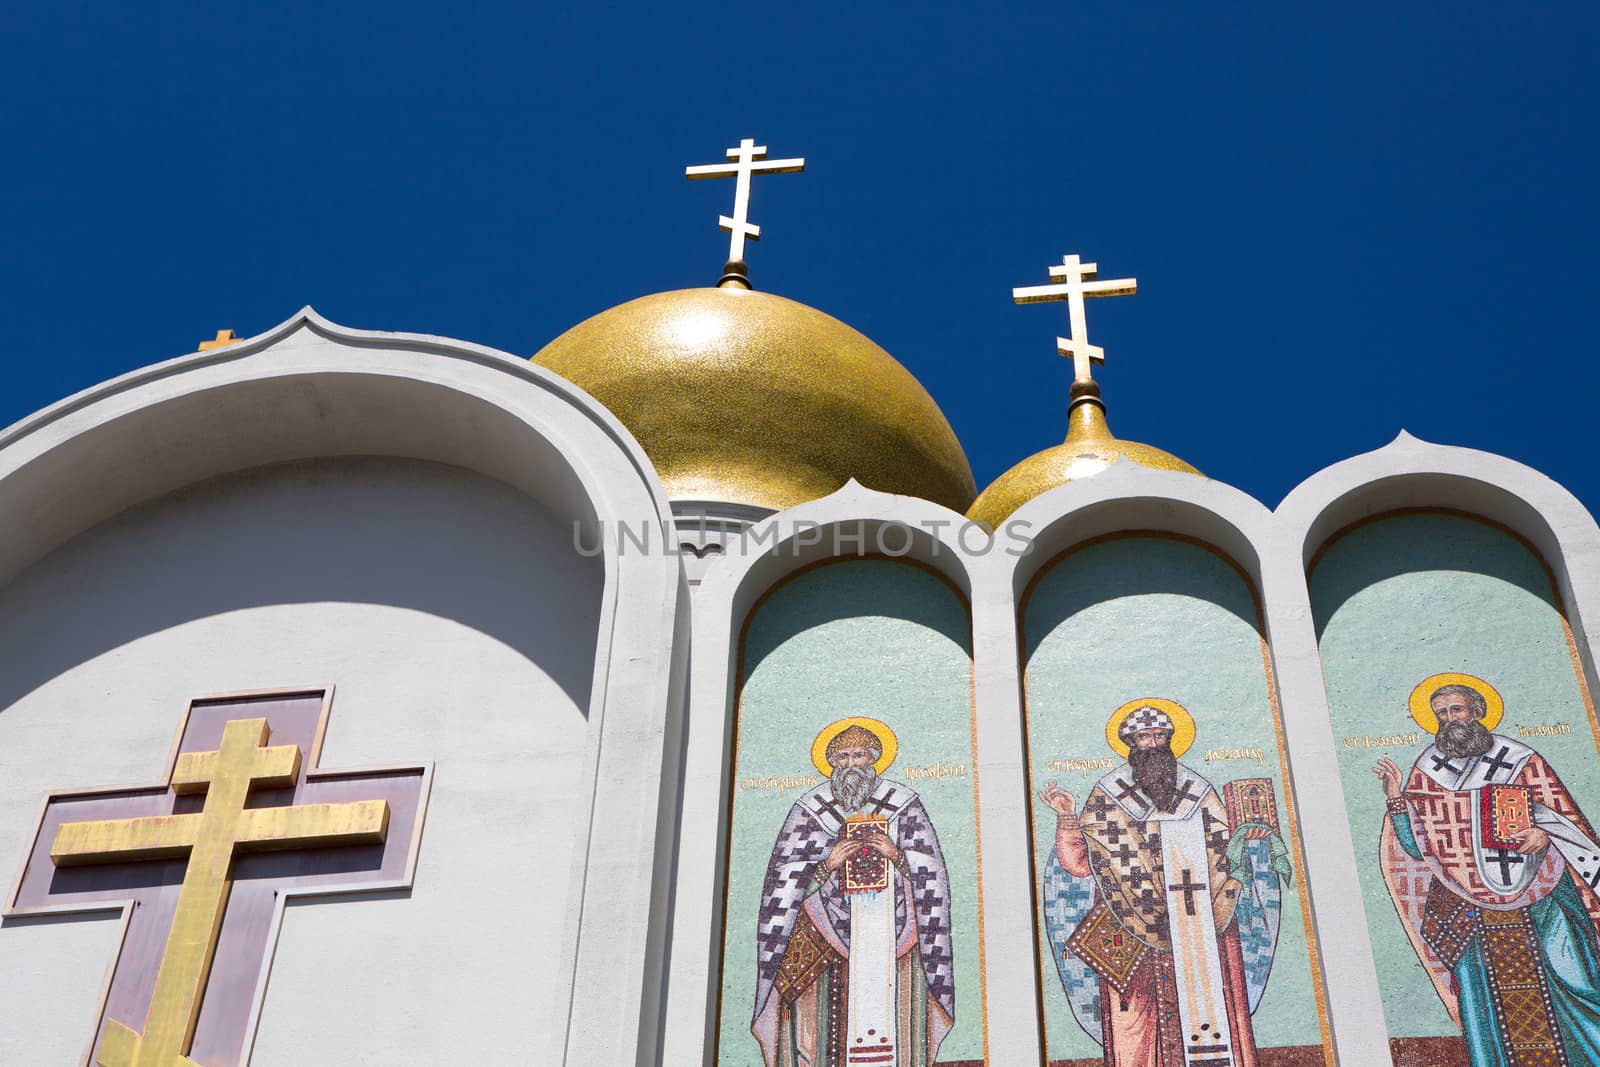 Russian Orthodox Church in San Francisco near by the bay and the sea against a blue sky